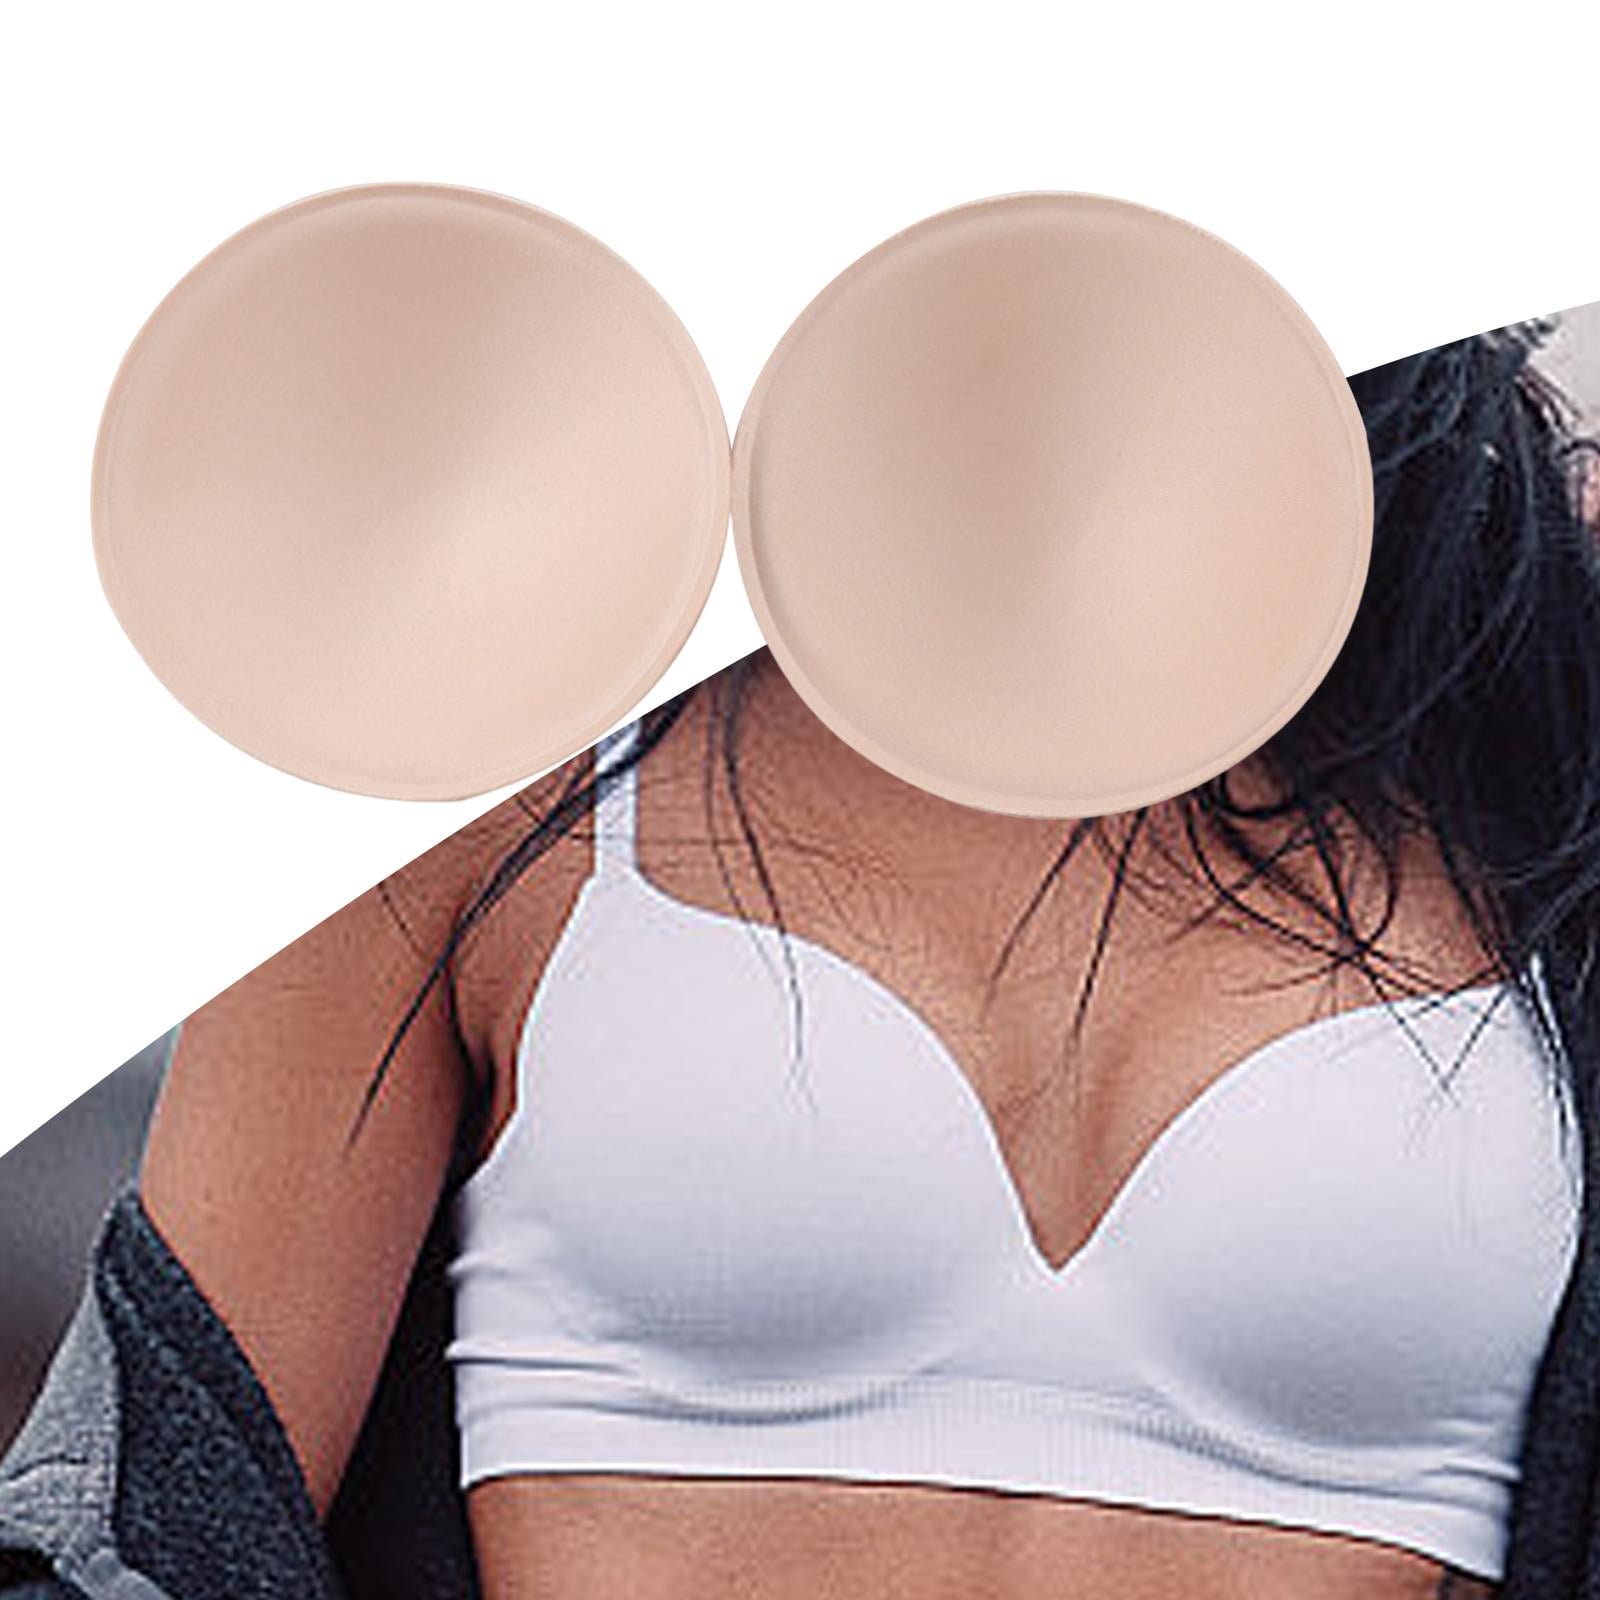 URSMART Round Bra Inserts Pads, Removable and Washable Bra Cups